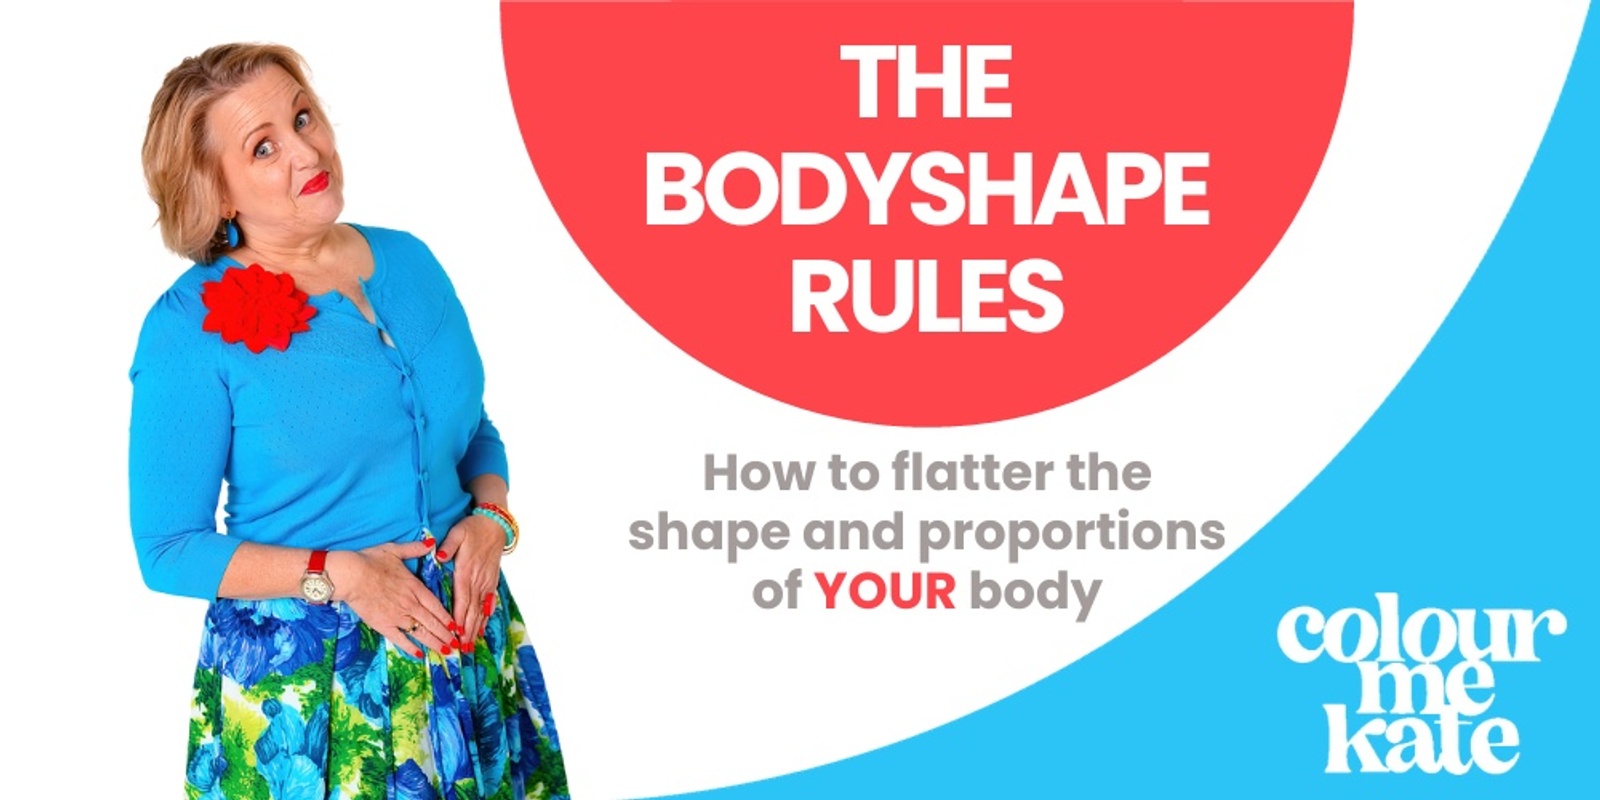 Banner image for THE BODYSHAPE RULES